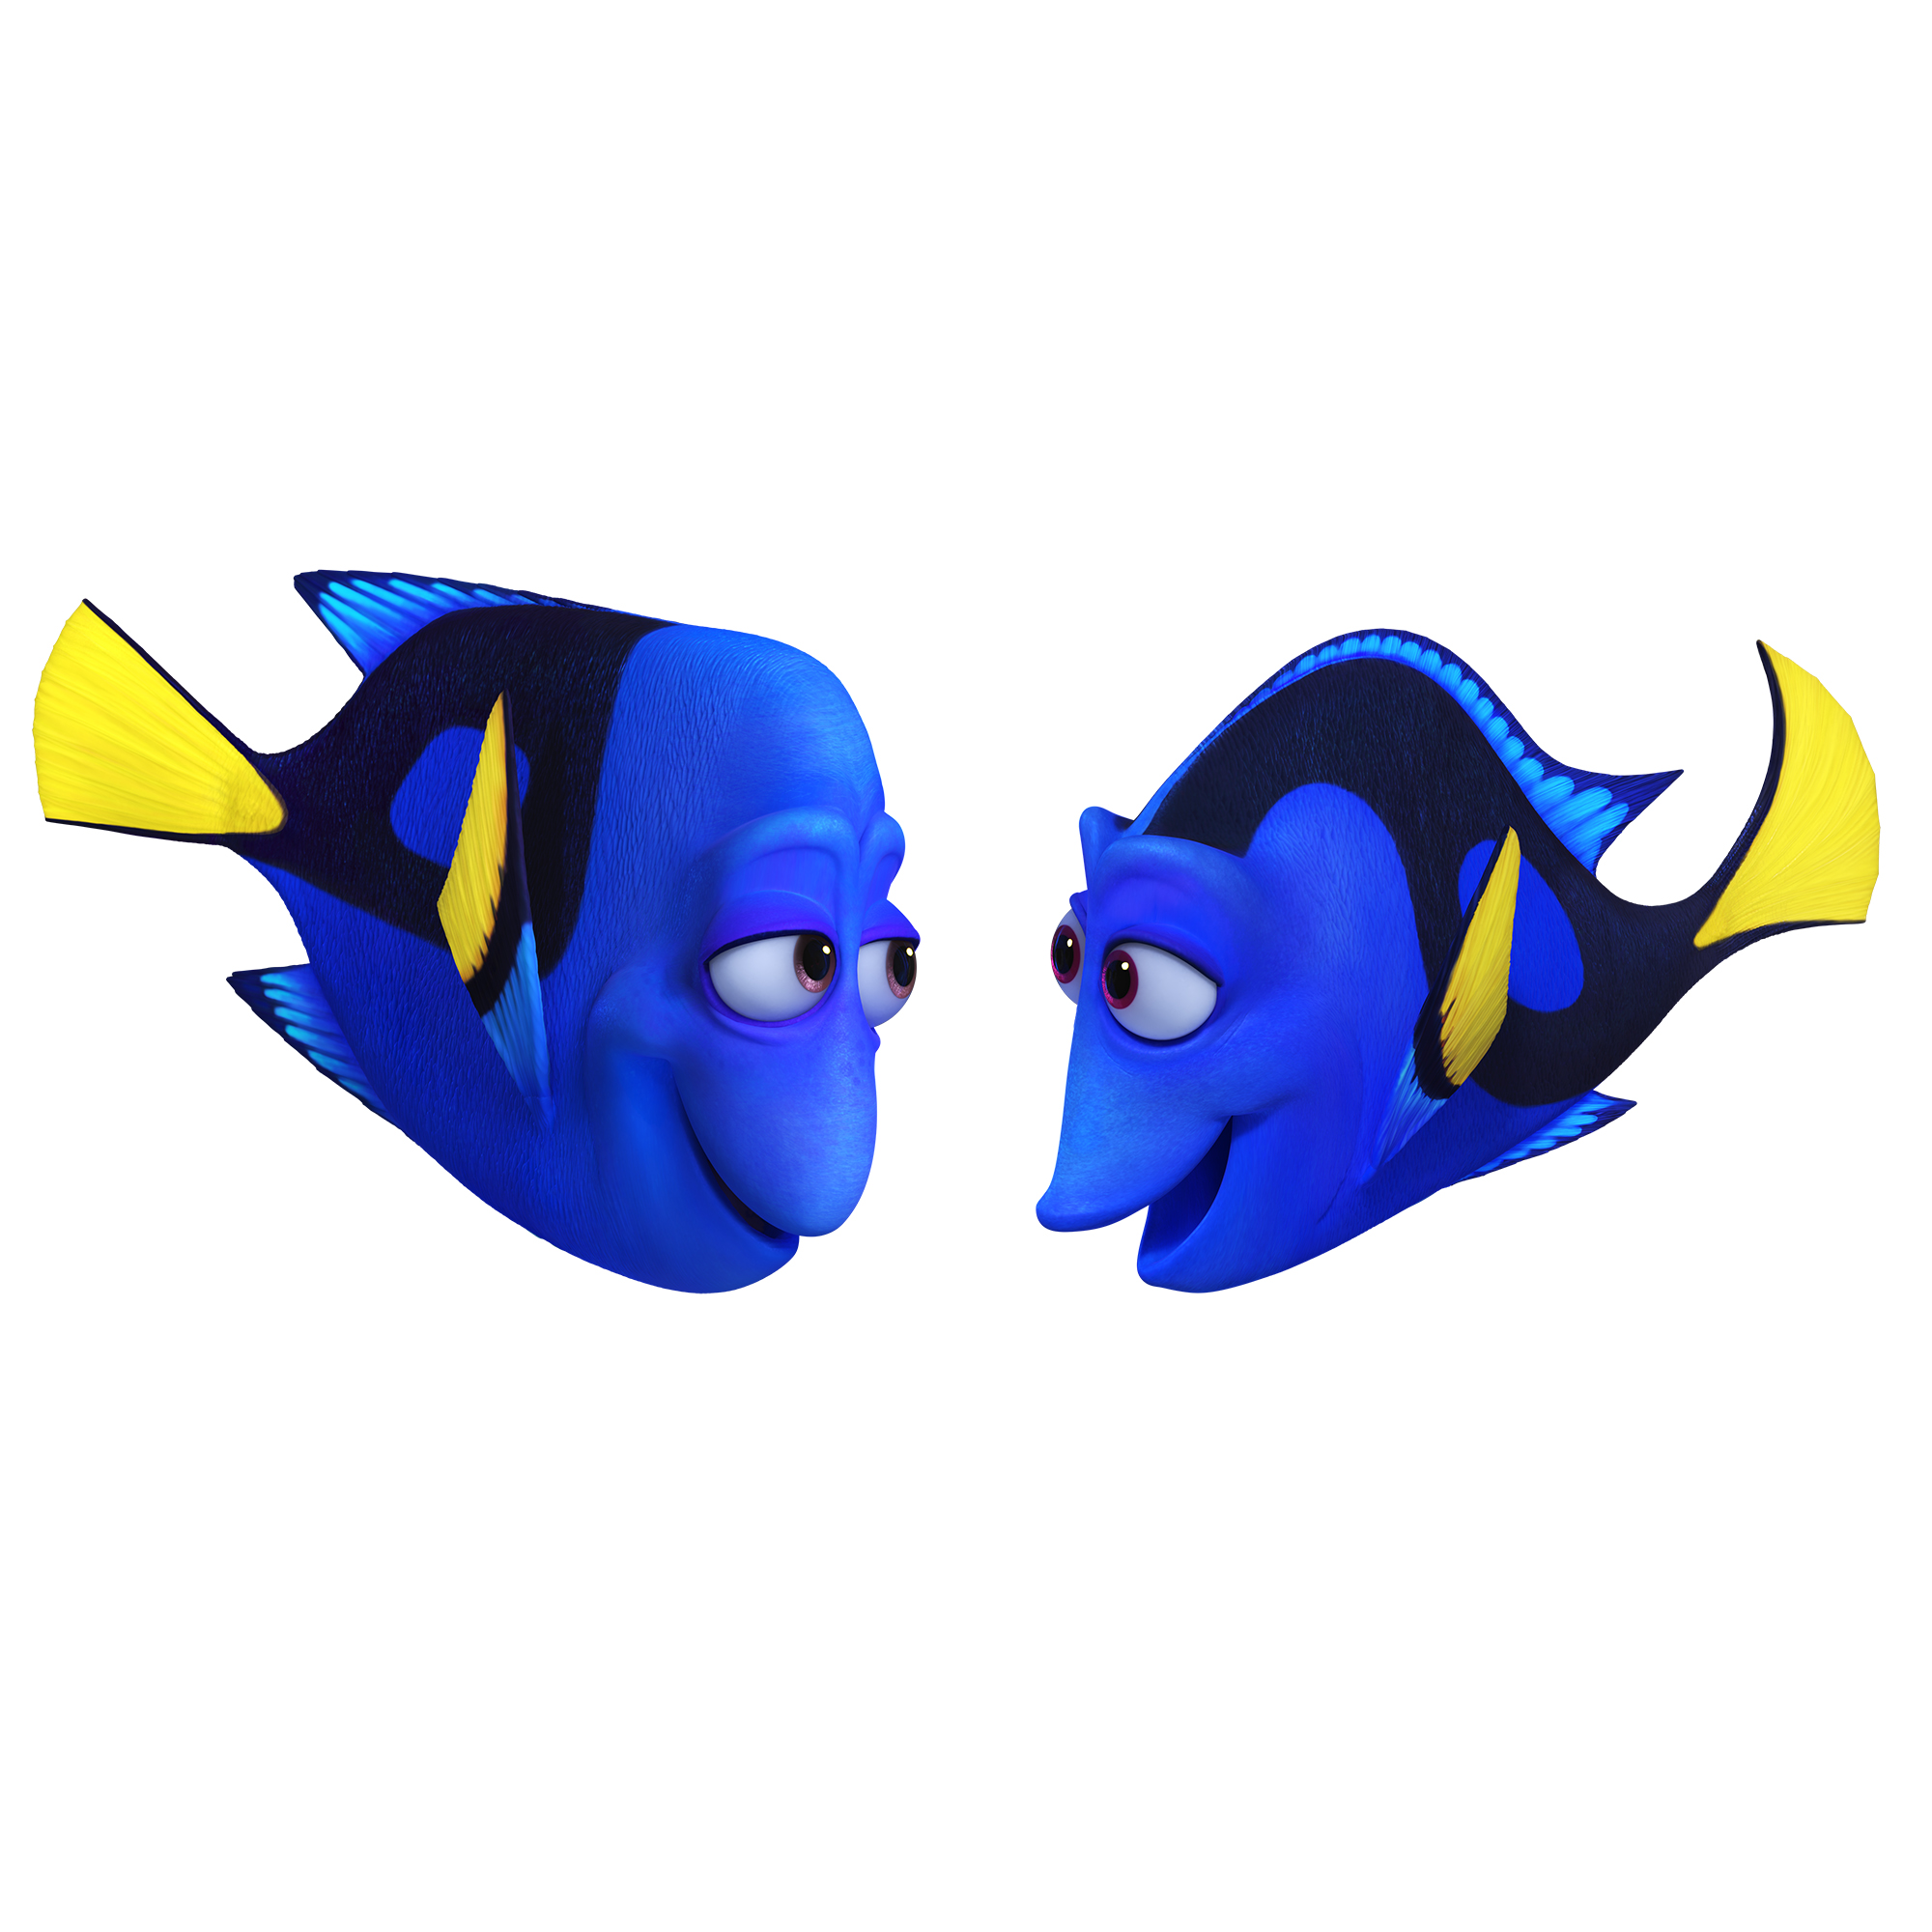 Full List of “Finding Dory” Cast & Characters Revealed!